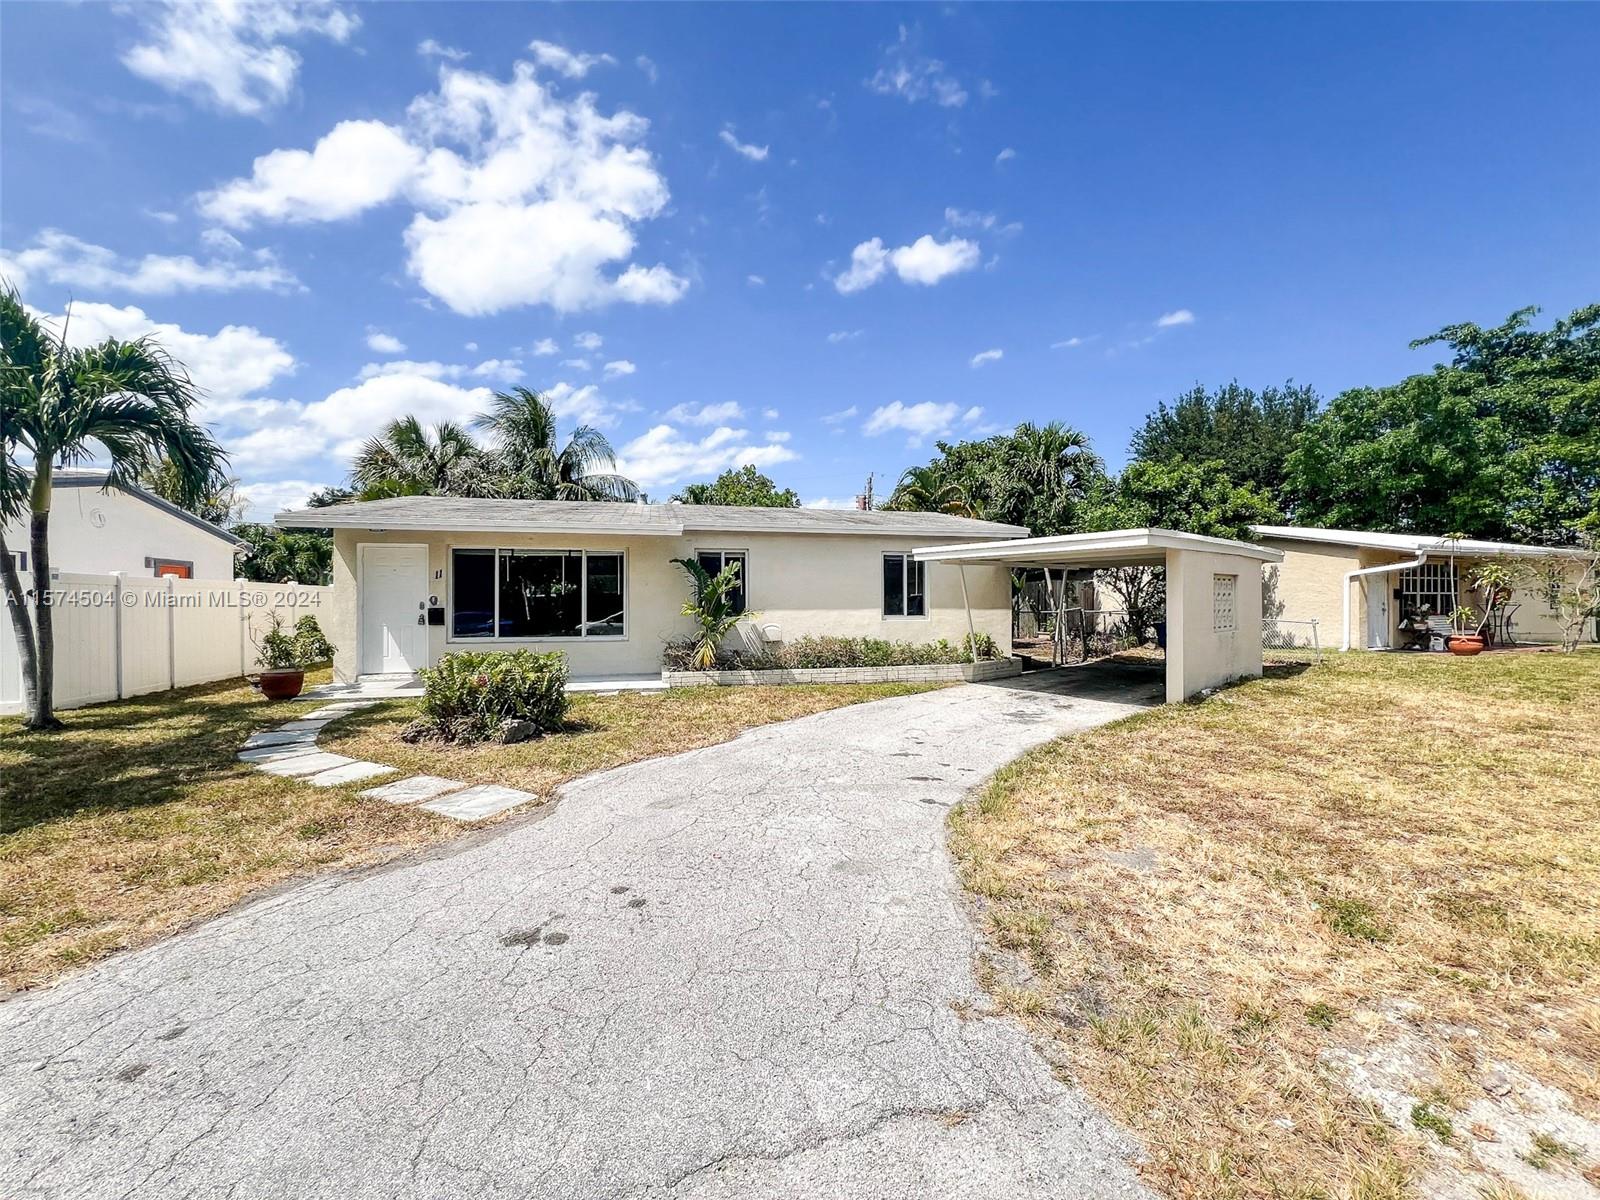 Property for Sale at 11 Ne 26th St St, Wilton Manors, Broward County, Florida - Bedrooms: 3 
Bathrooms: 2  - $564,900